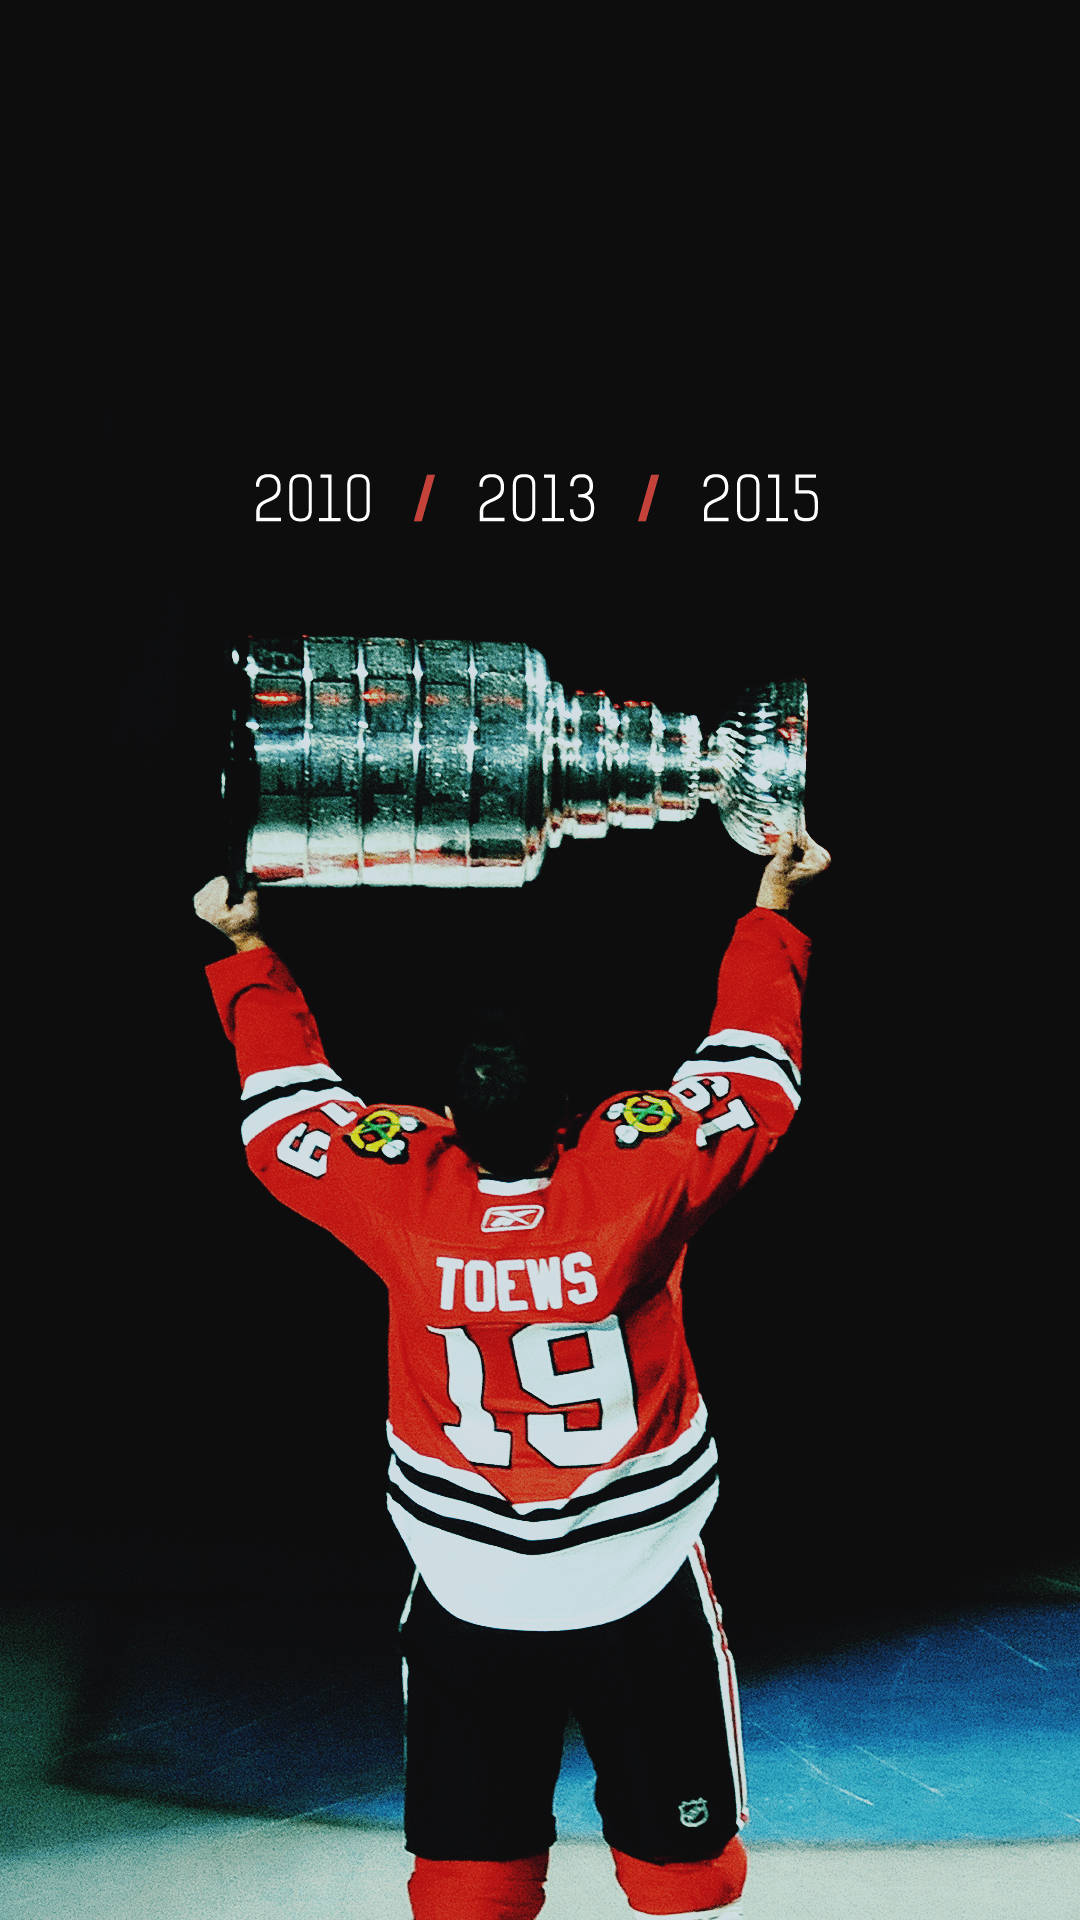 Ice Hockey MVP - Jonathan Toews in action in a high intensity game. Wallpaper